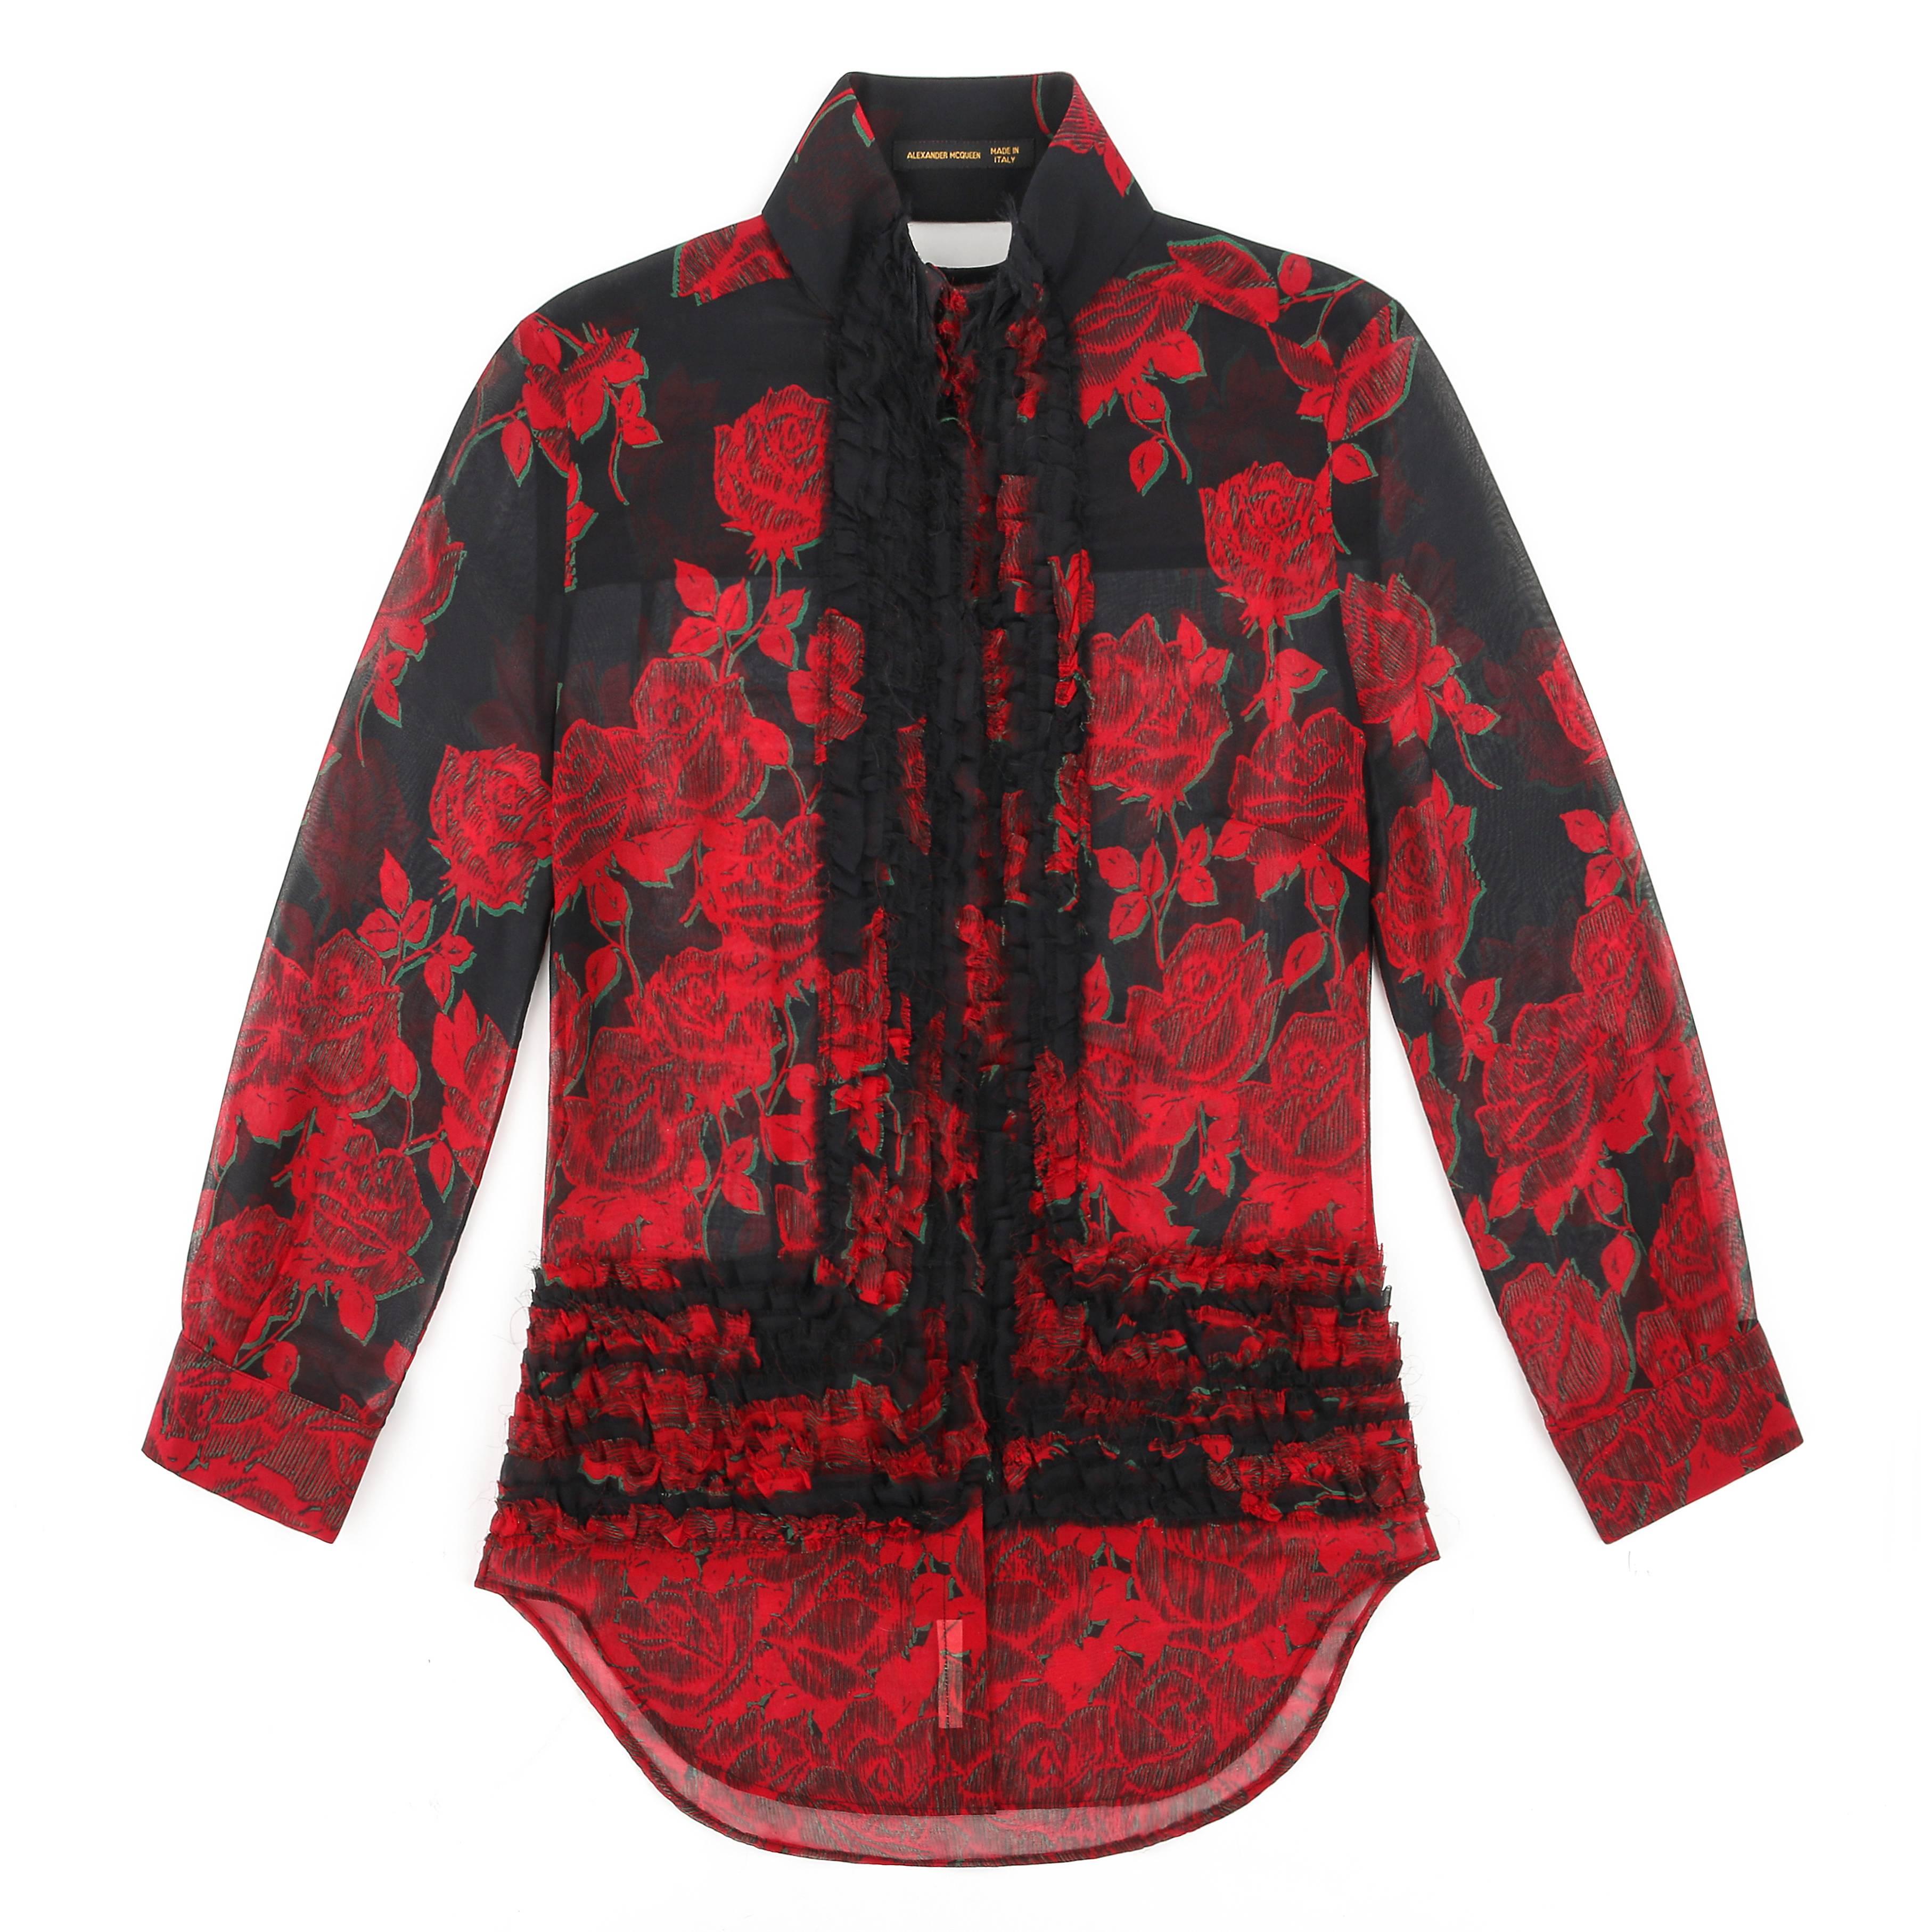 ALEXANDER McQUEEN S/S 2002 "Dance Of The Twisted Bull" Rose Print Chiffon Blouse